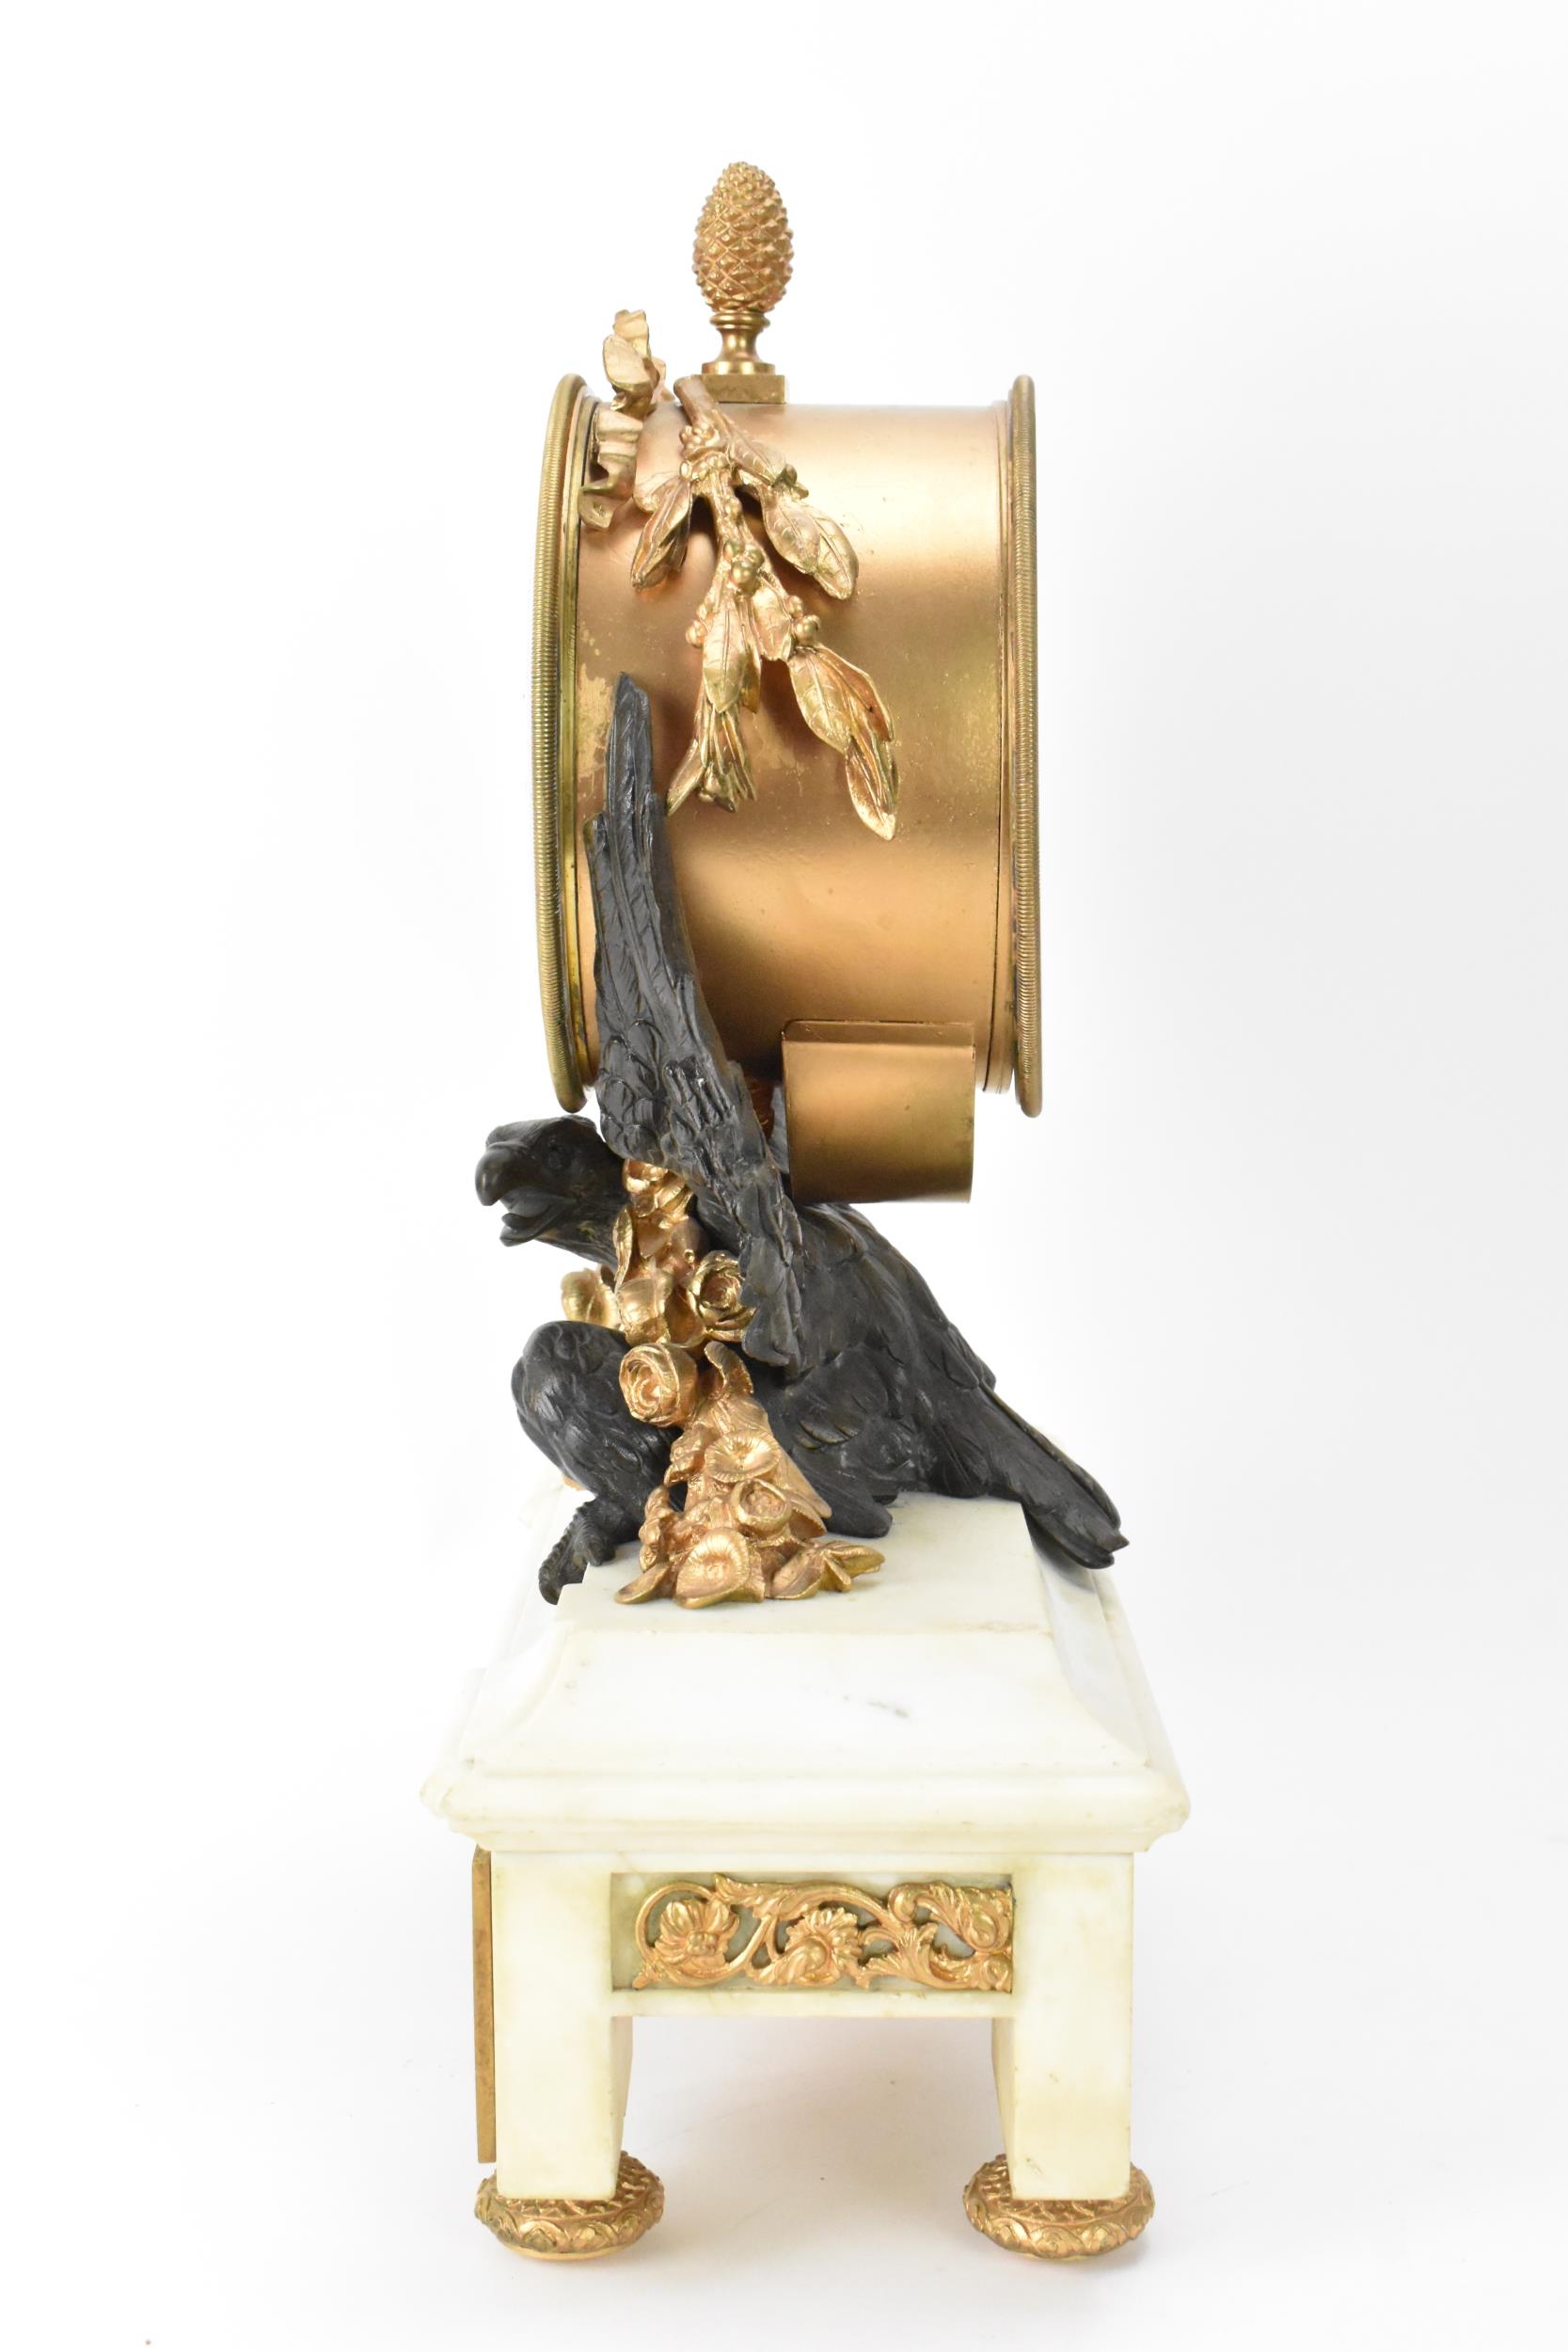 A 19th century French Marble, Bronze and Ormolu Mounted Empire Clock by Deniere of Paris, with large - Image 4 of 7